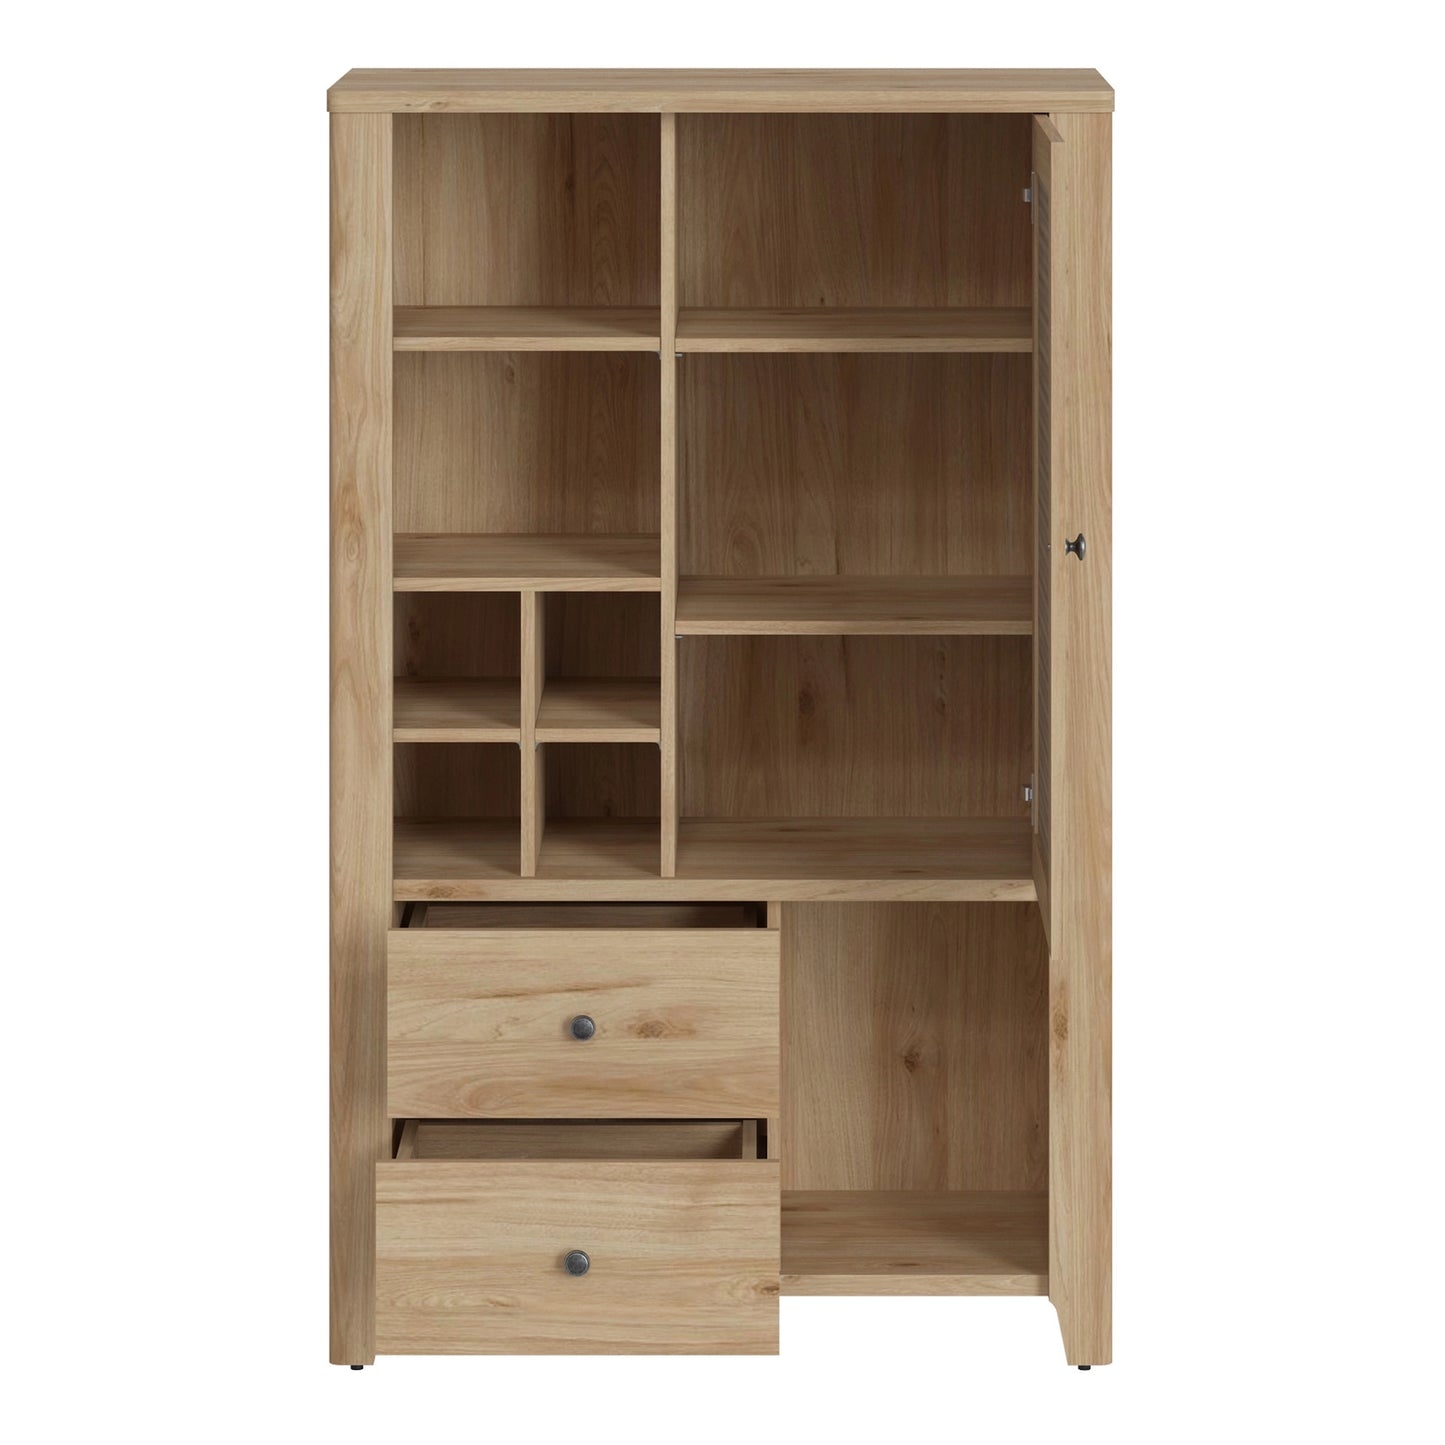 Furniture To Go Cestino 1 Door 2 Drawer Cabinet in Jackson Hickory Oak & Rattan Effect